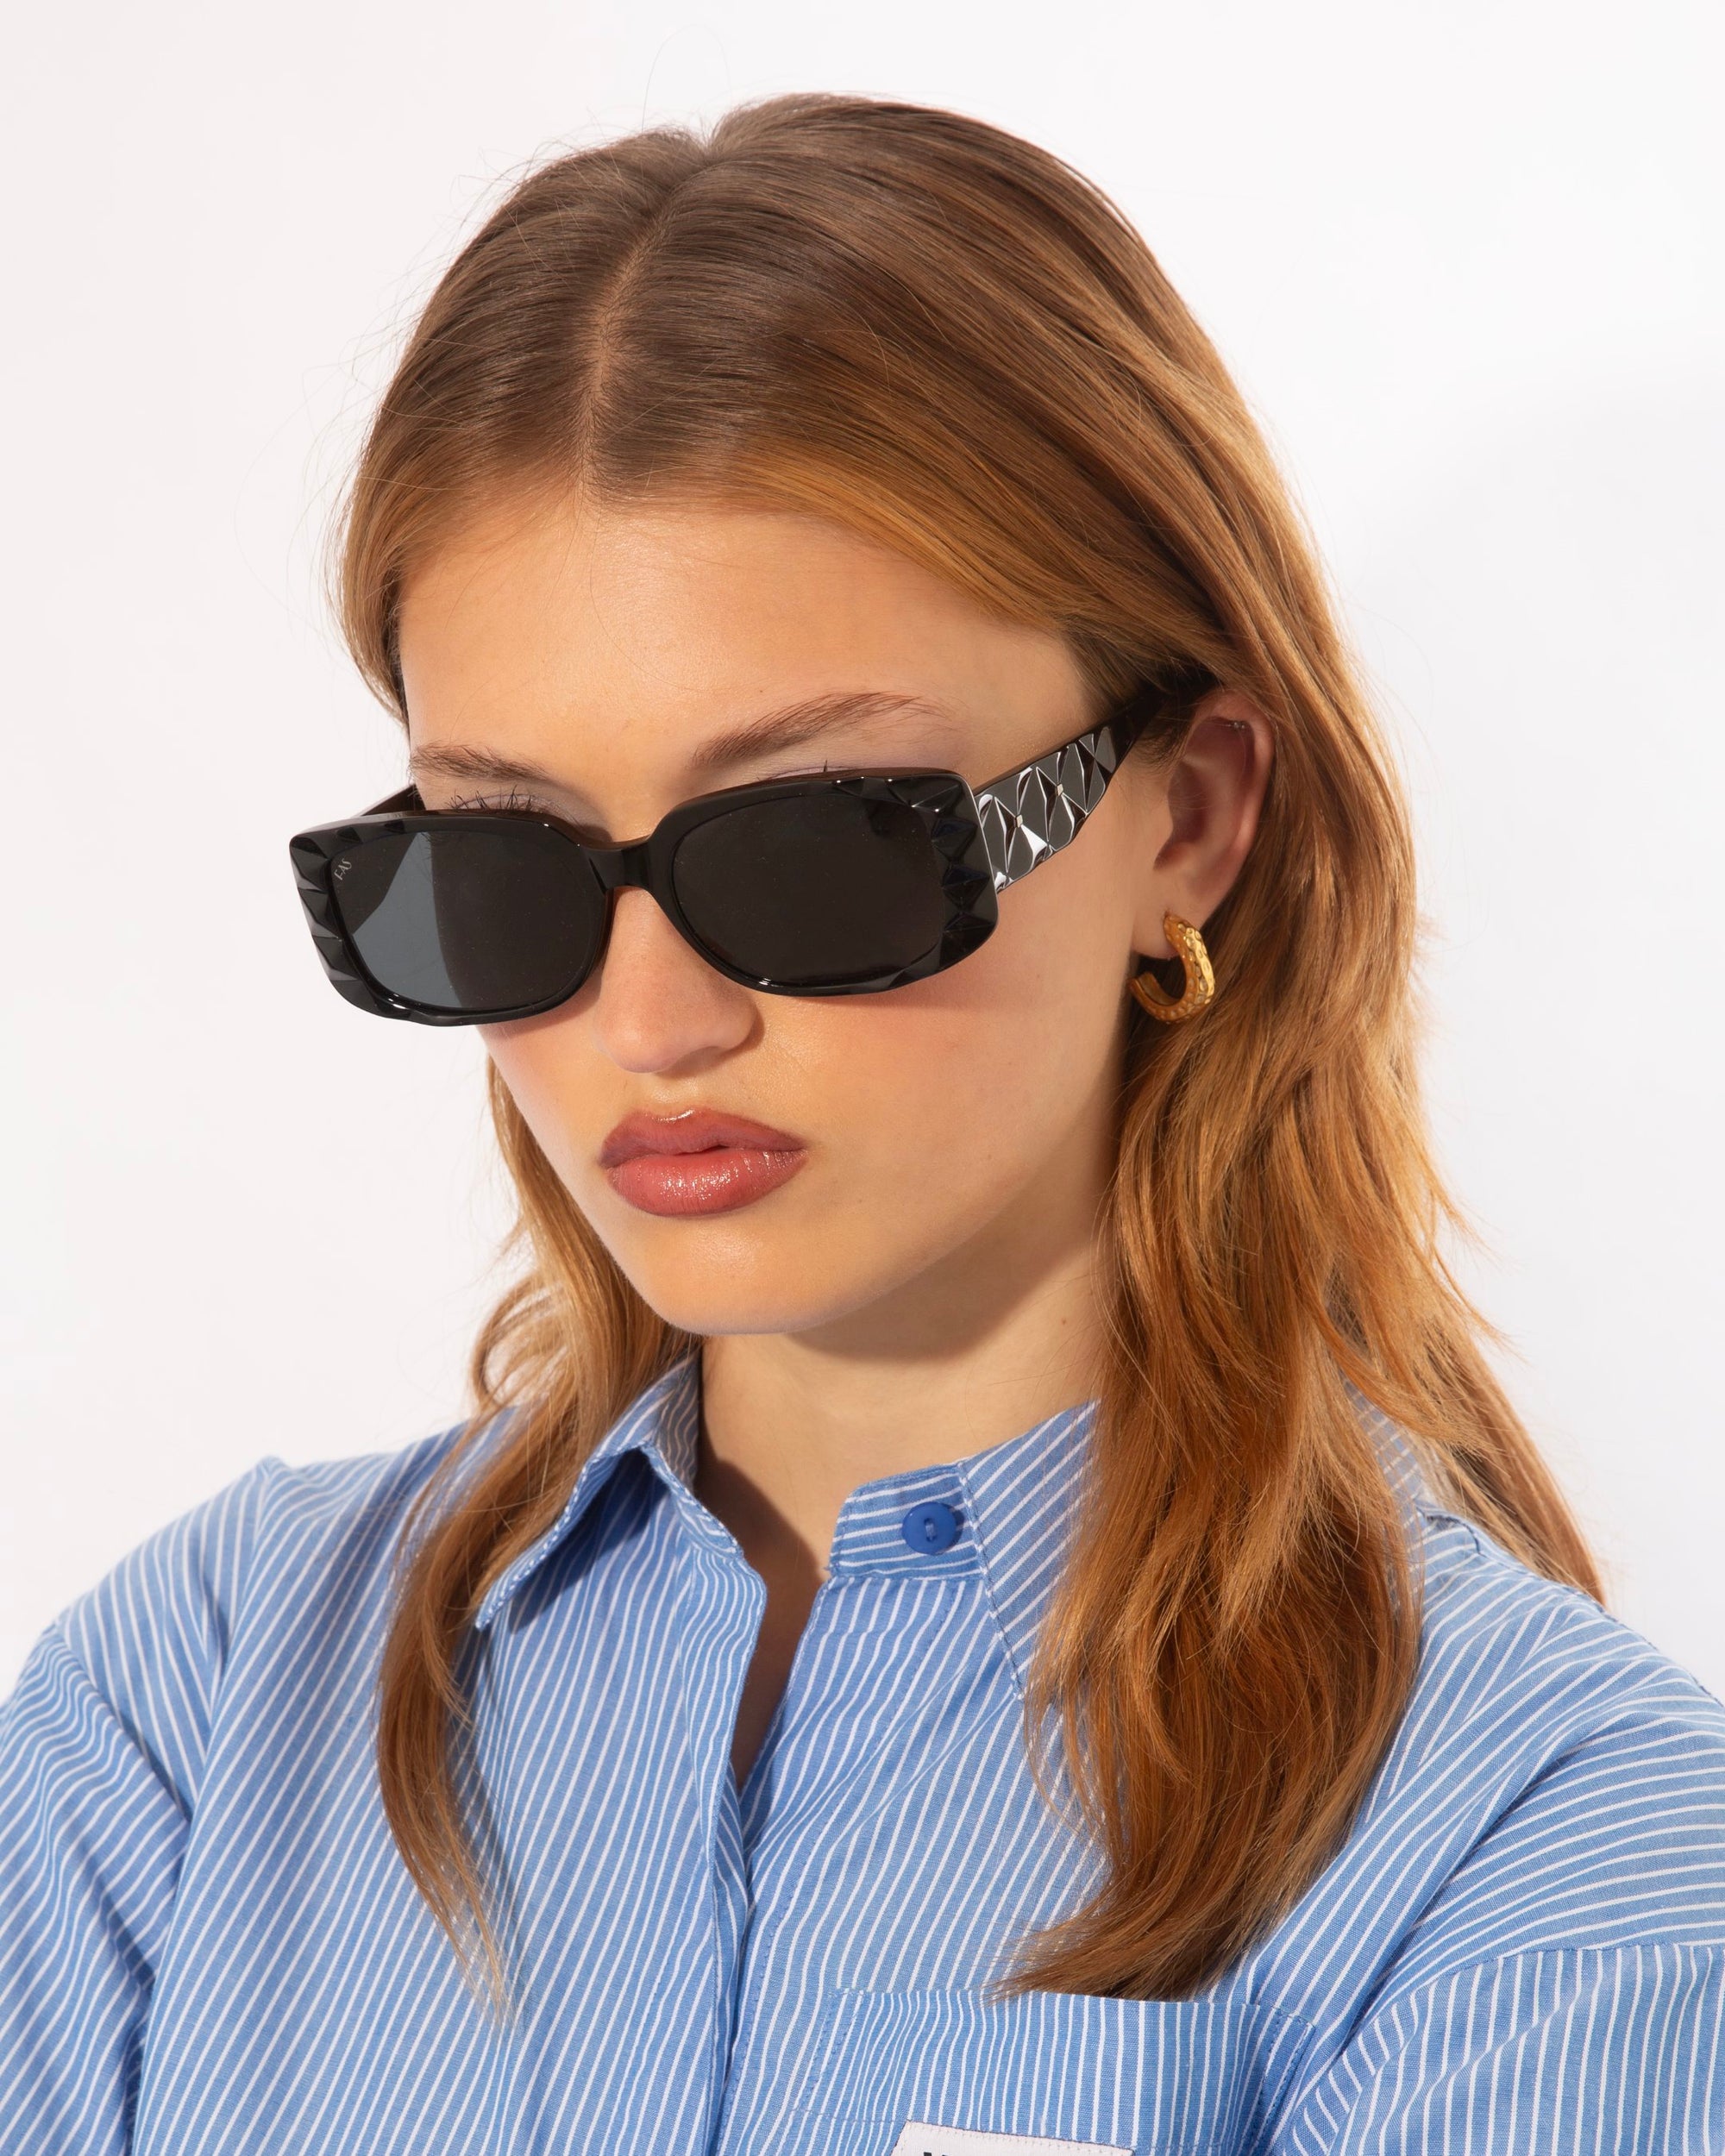 A person with wavy, auburn hair is wearing black rectangular For Art&#39;s Sake® Cushion sunglasses with a textured frame and ultra-lightweight nylon lenses offering 100% UV protection. They also have gold hoop earrings and a blue, striped button-up shirt. The person is looking down with a serious expression against a plain white background.